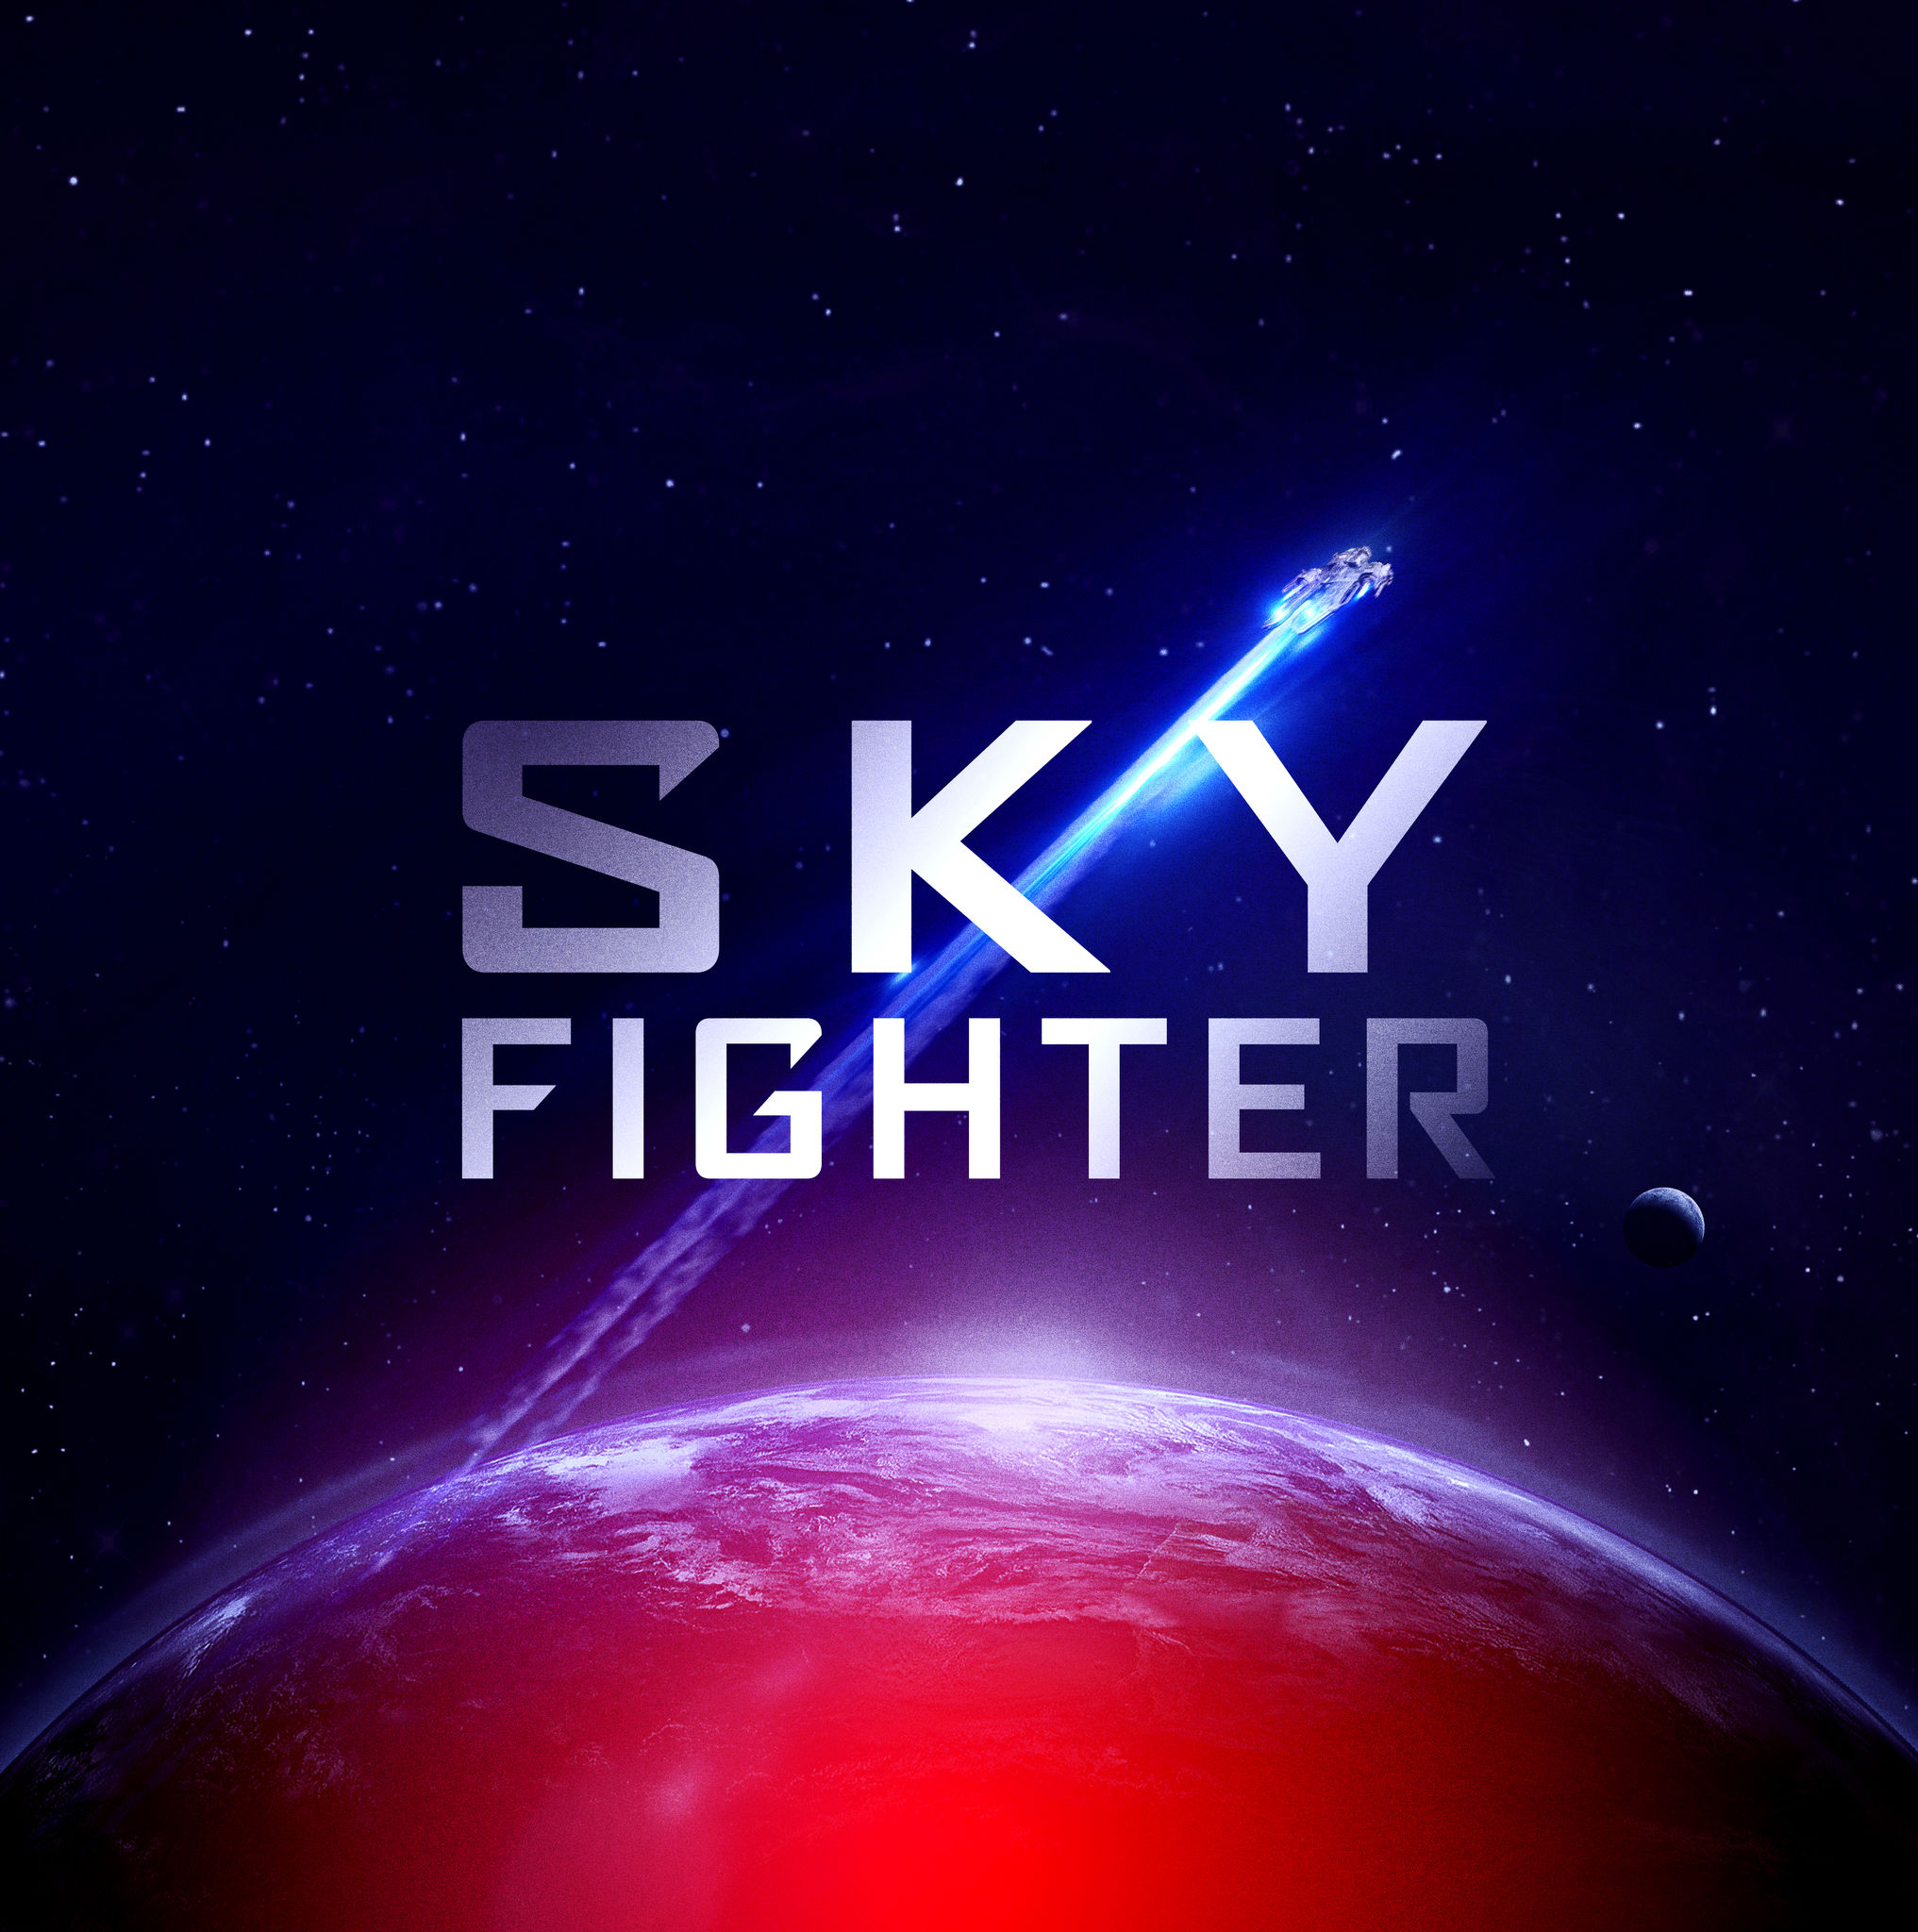 Sky Fighter Indiegogo Campaign Video